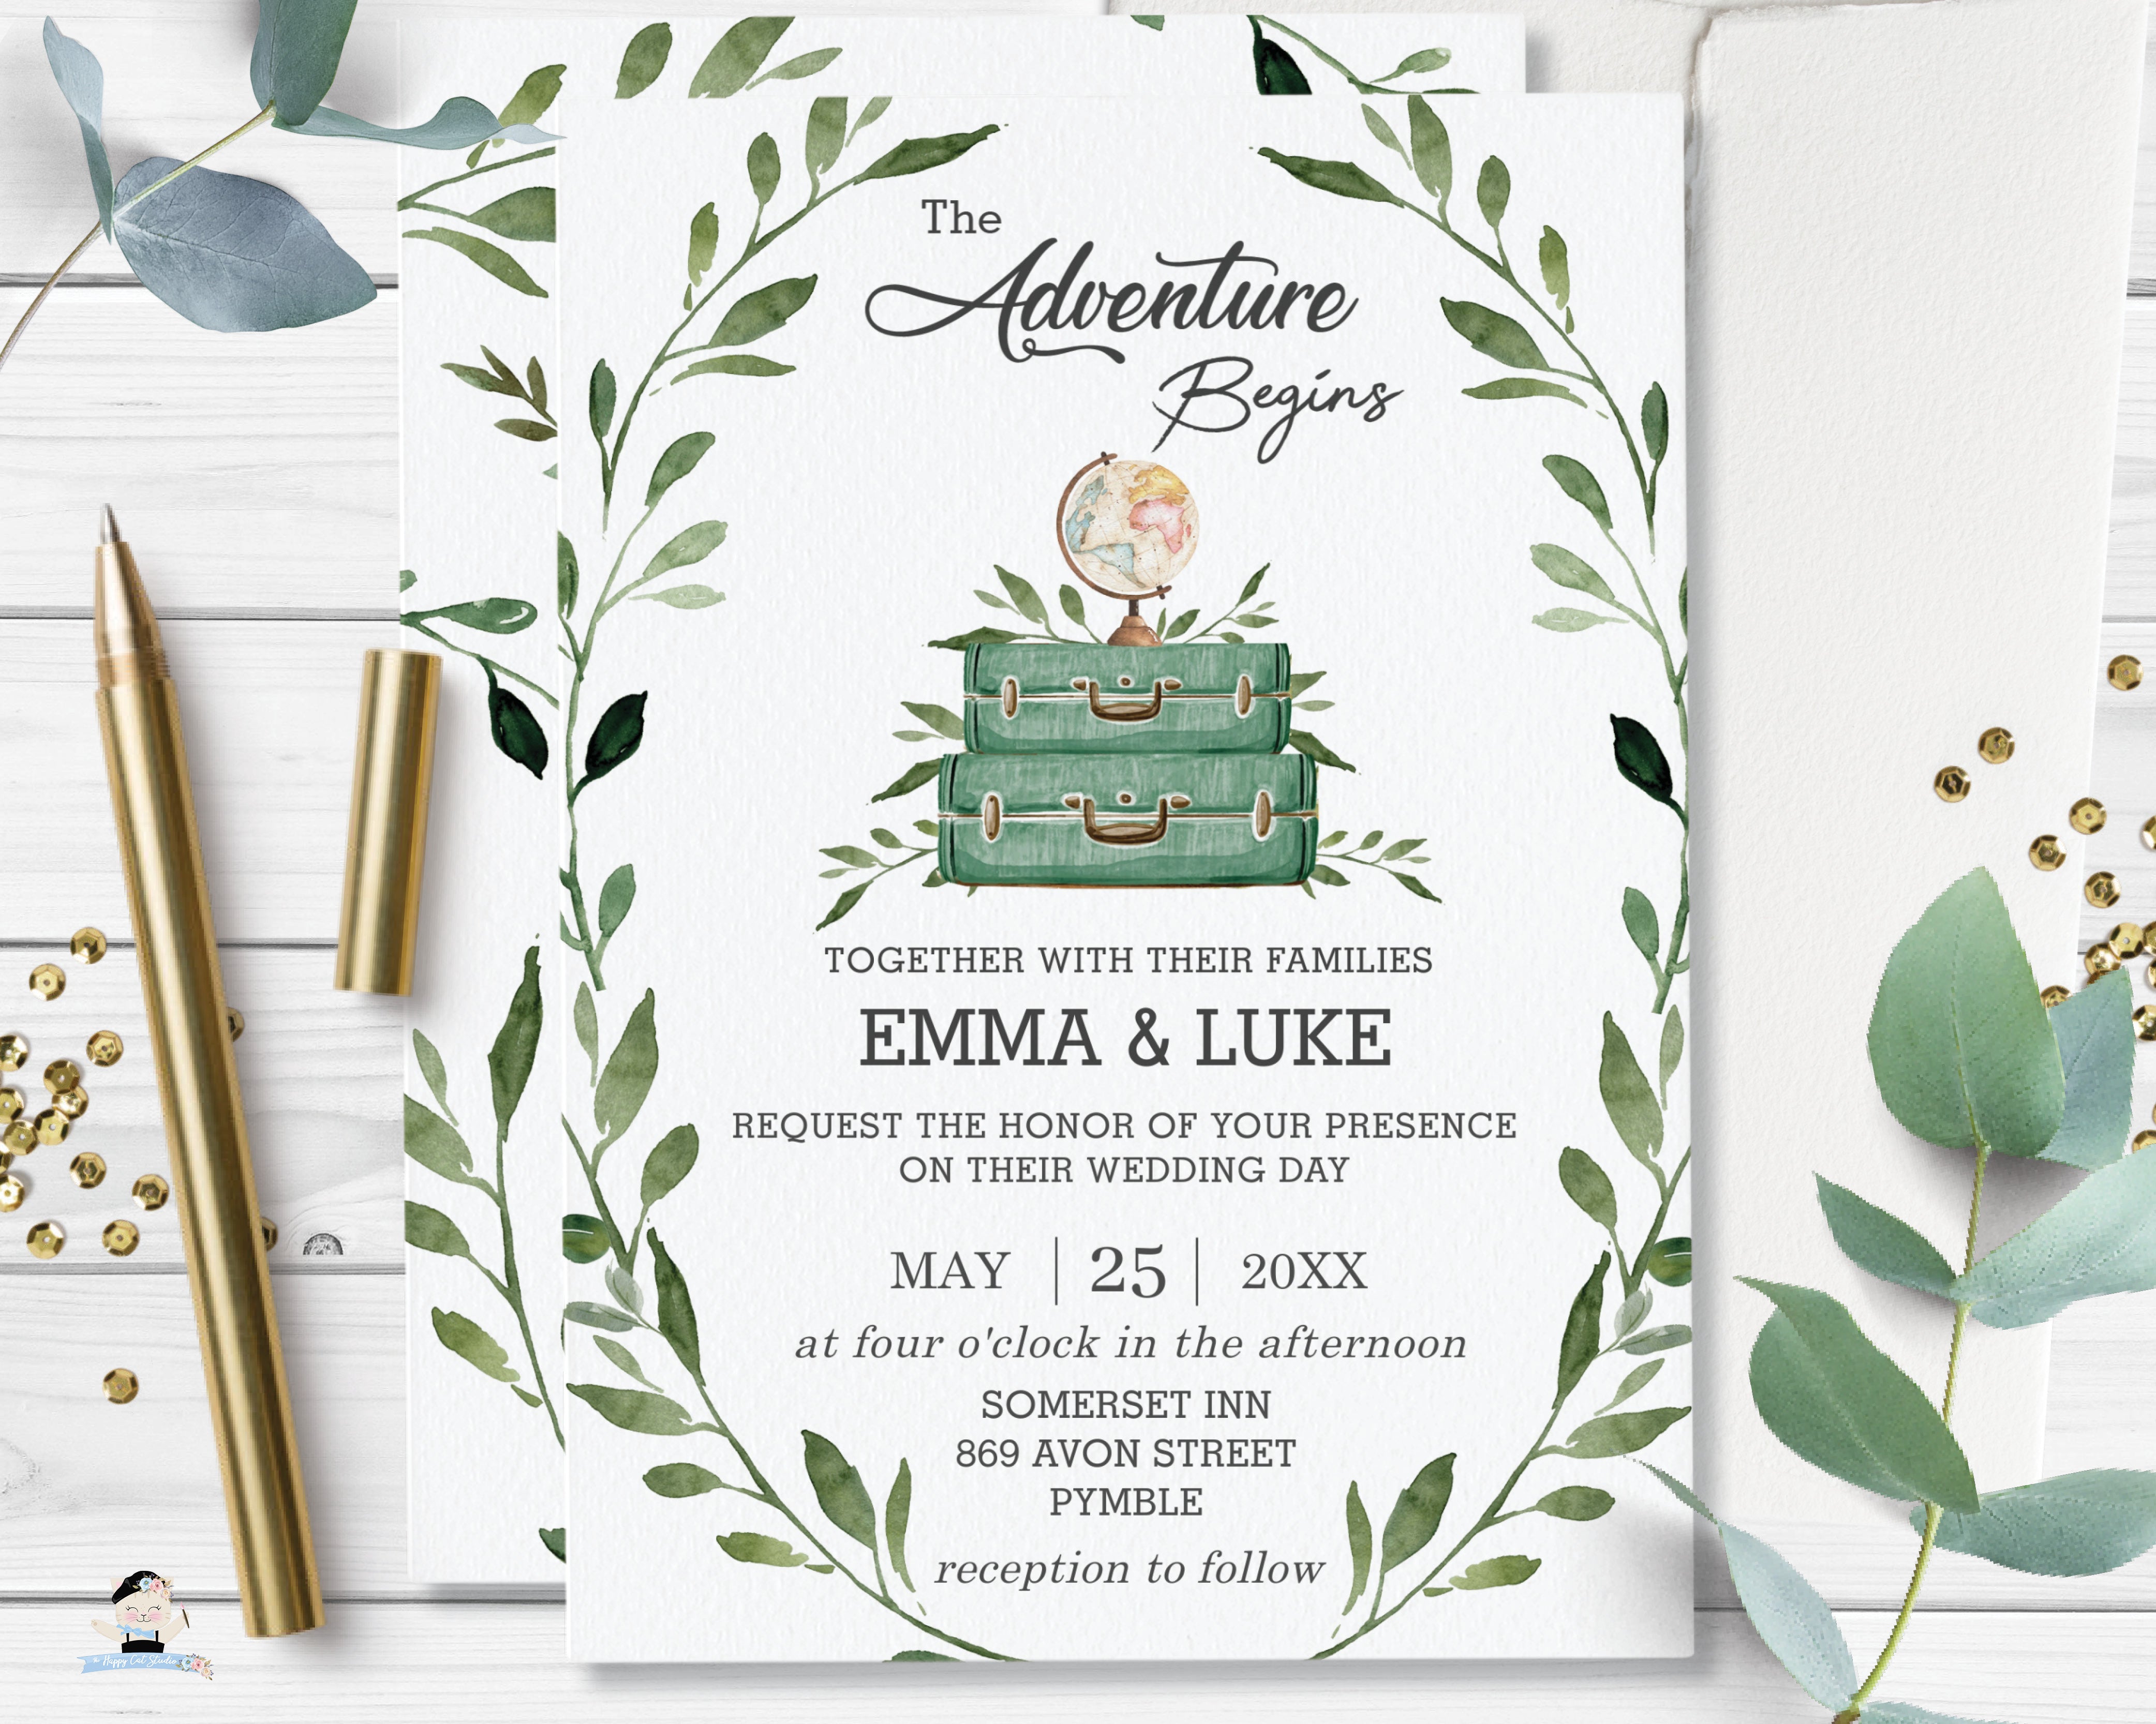 Wedding Invitation with Accessories. Blank Card Mockup, Envelope, Silk  Ribbon, Olive Branch and Pearls Stock Photo - Image of green, love:  194608078